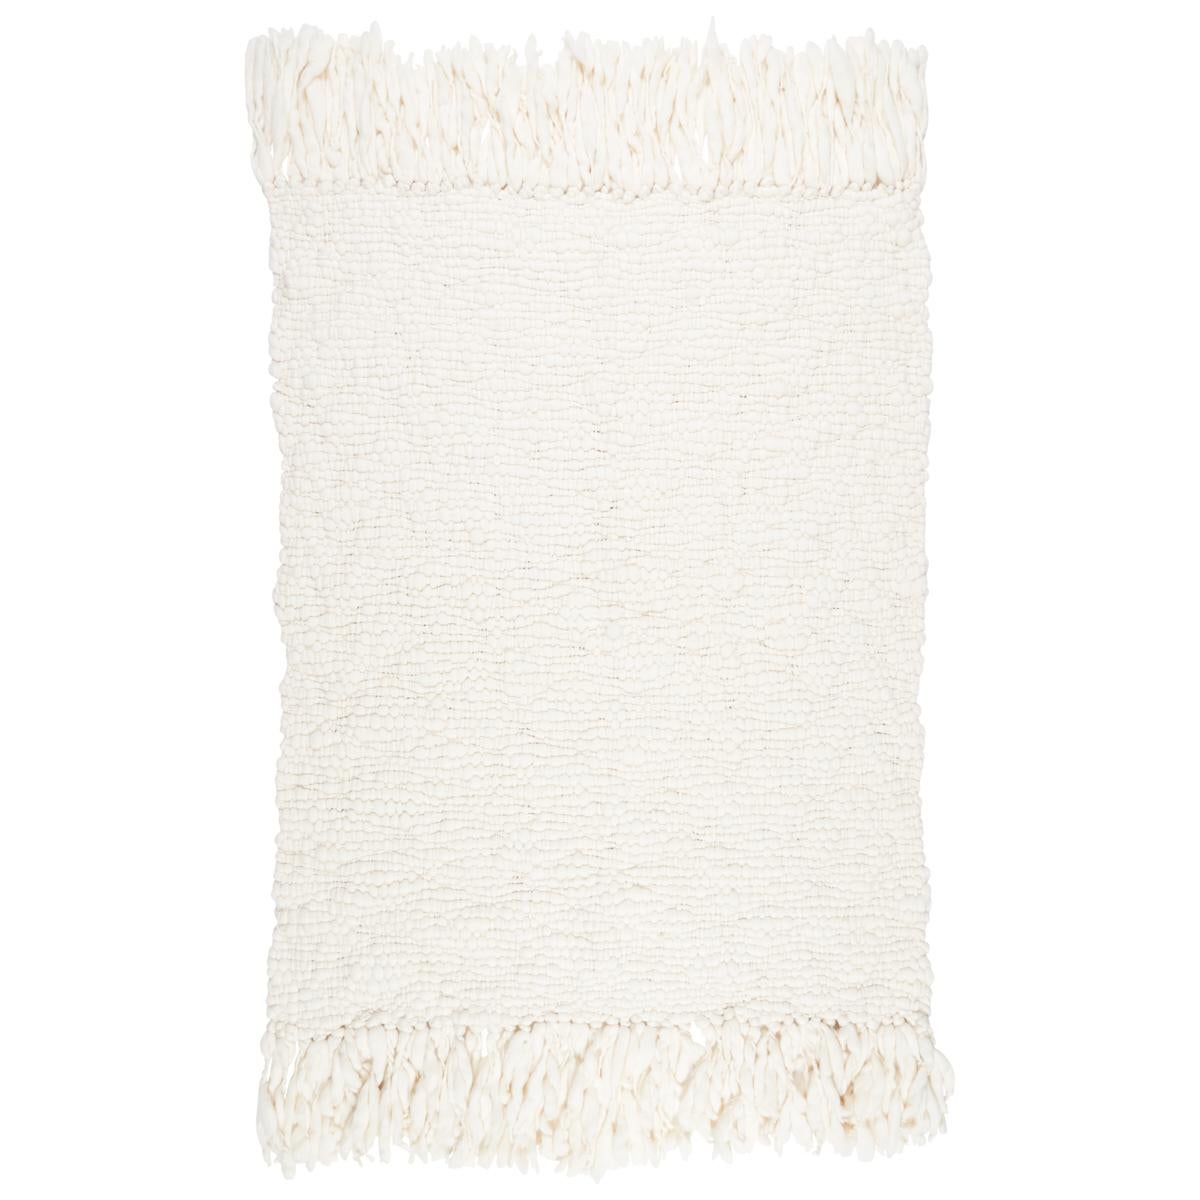 Volumes of superfine merino wool yarn have been loosely knitted together into chunky knots that resemble lush, fluffy clouds. Hand knitted in Argentina and finished with thick fringes, the Cloud Wool Throw is a forever piece finished to ensure the